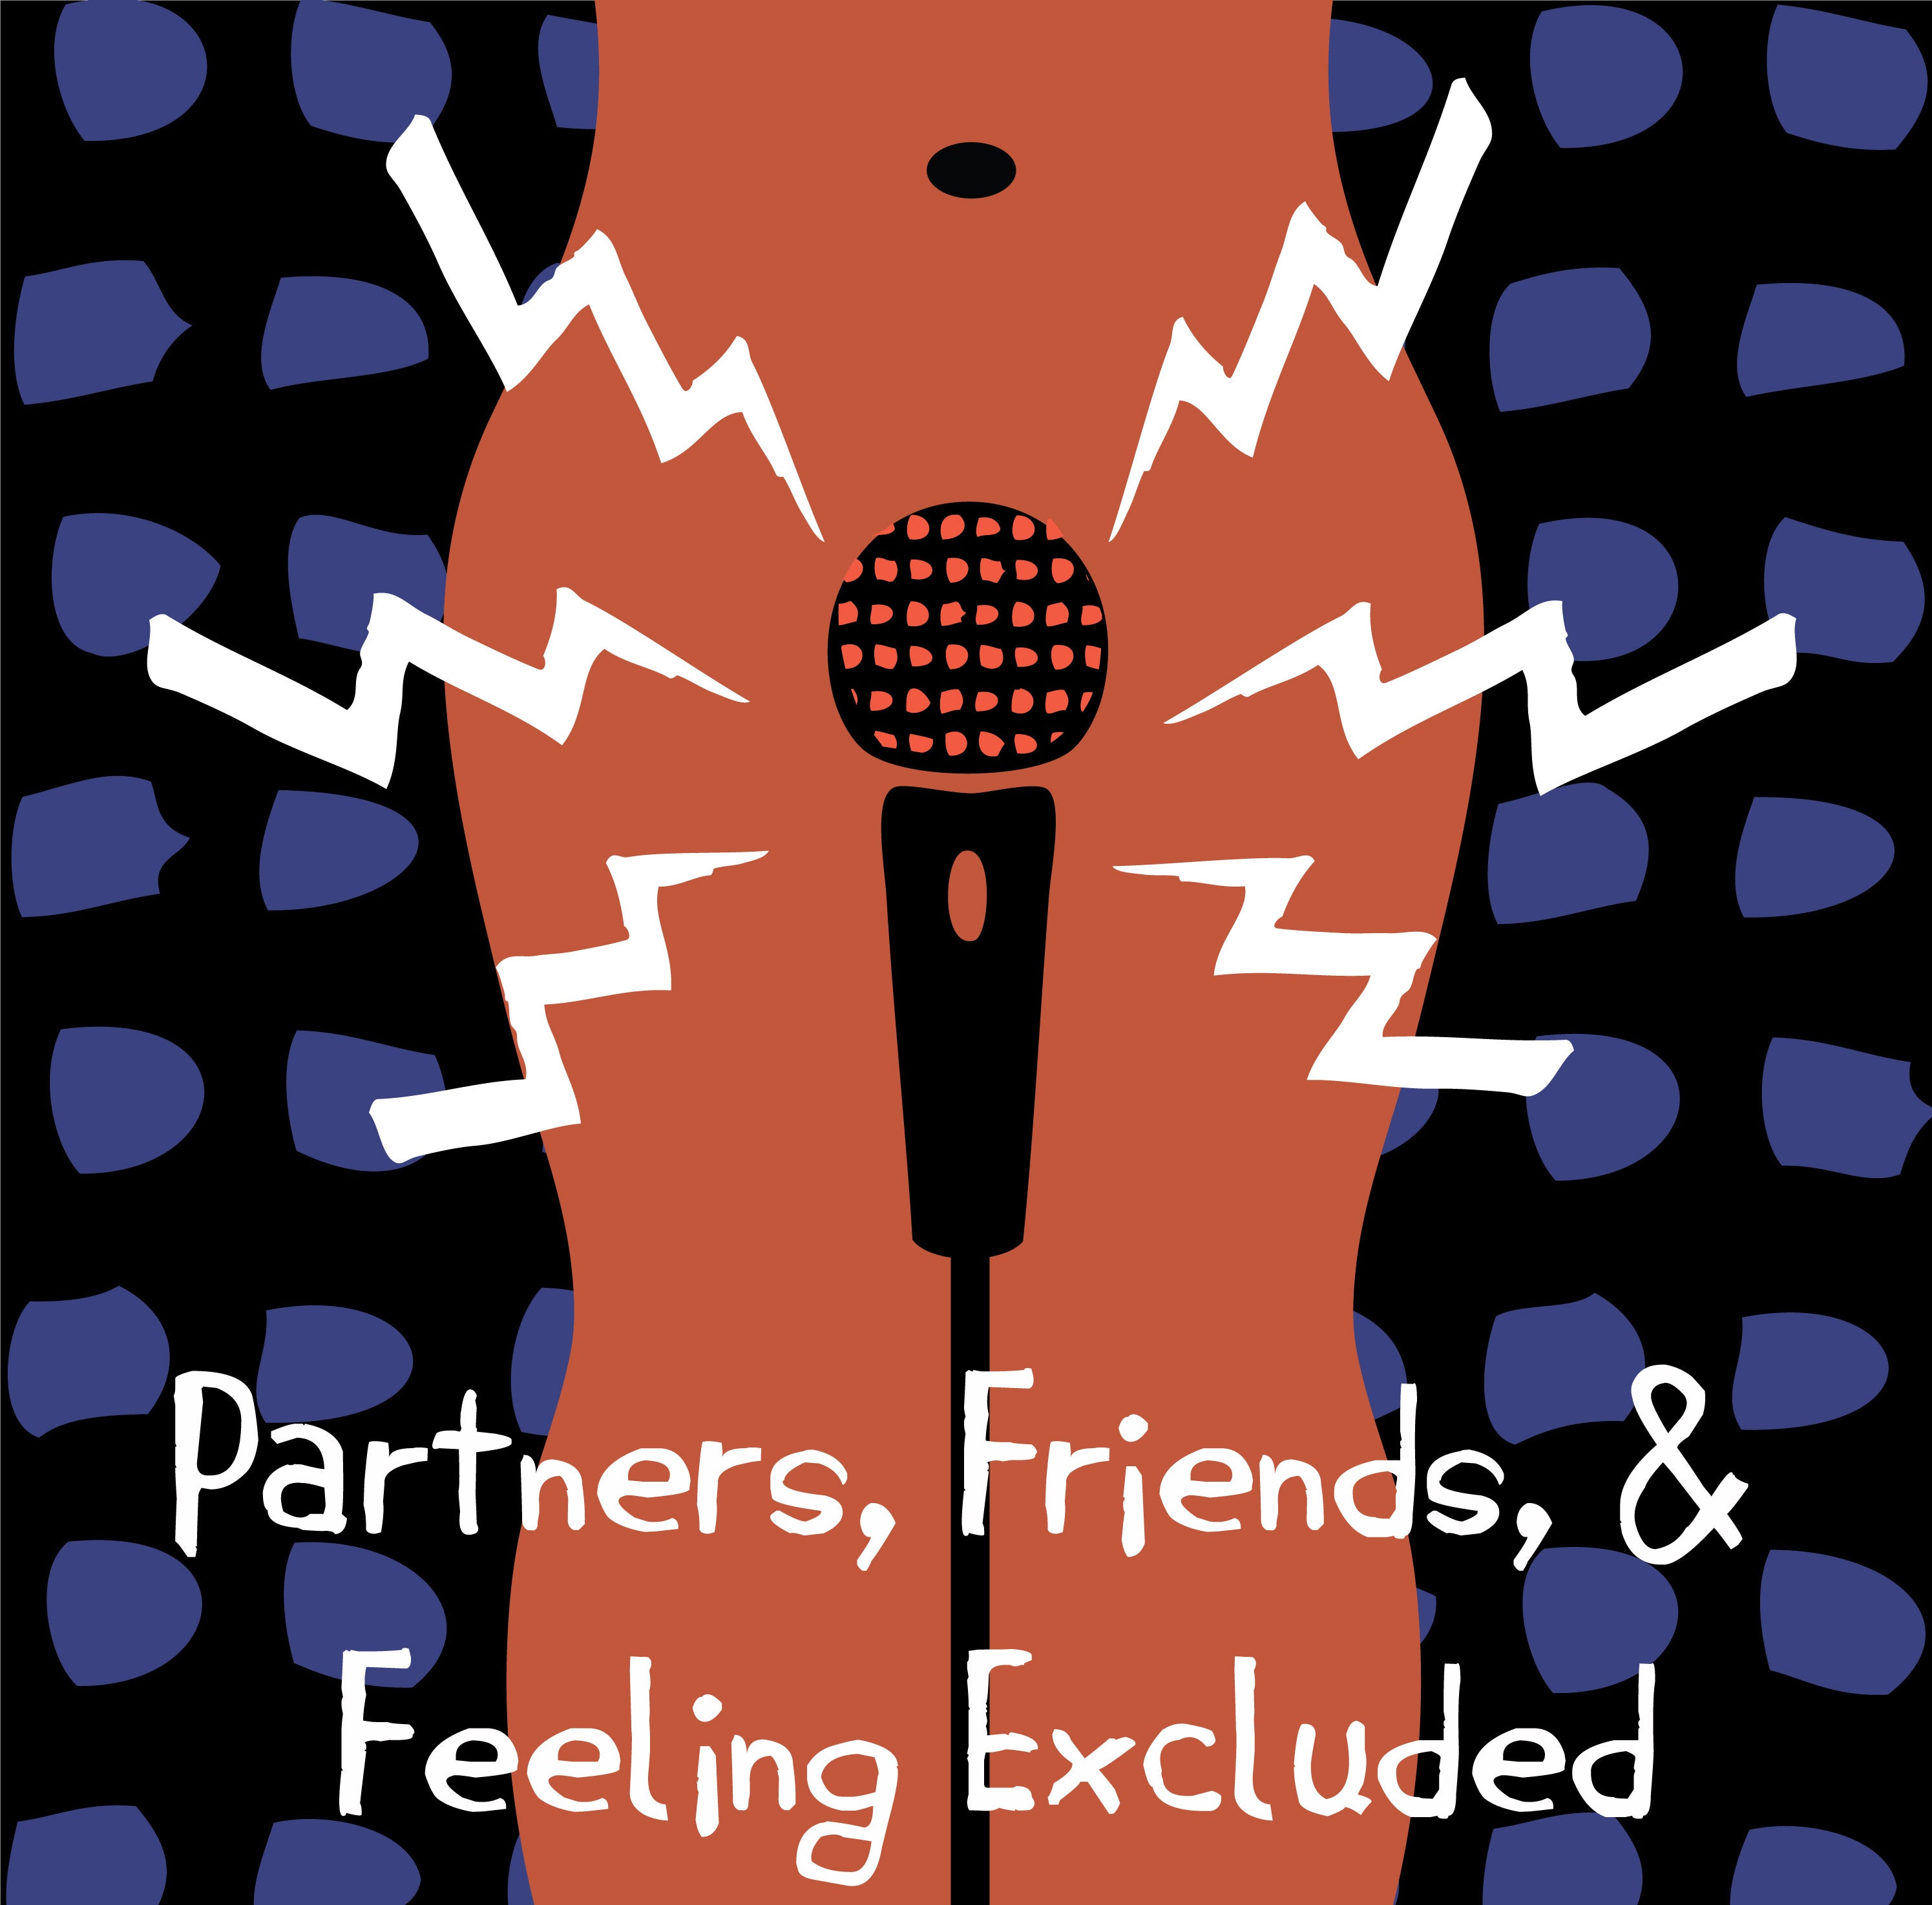 Partners, Friends, & Feeling Excluded